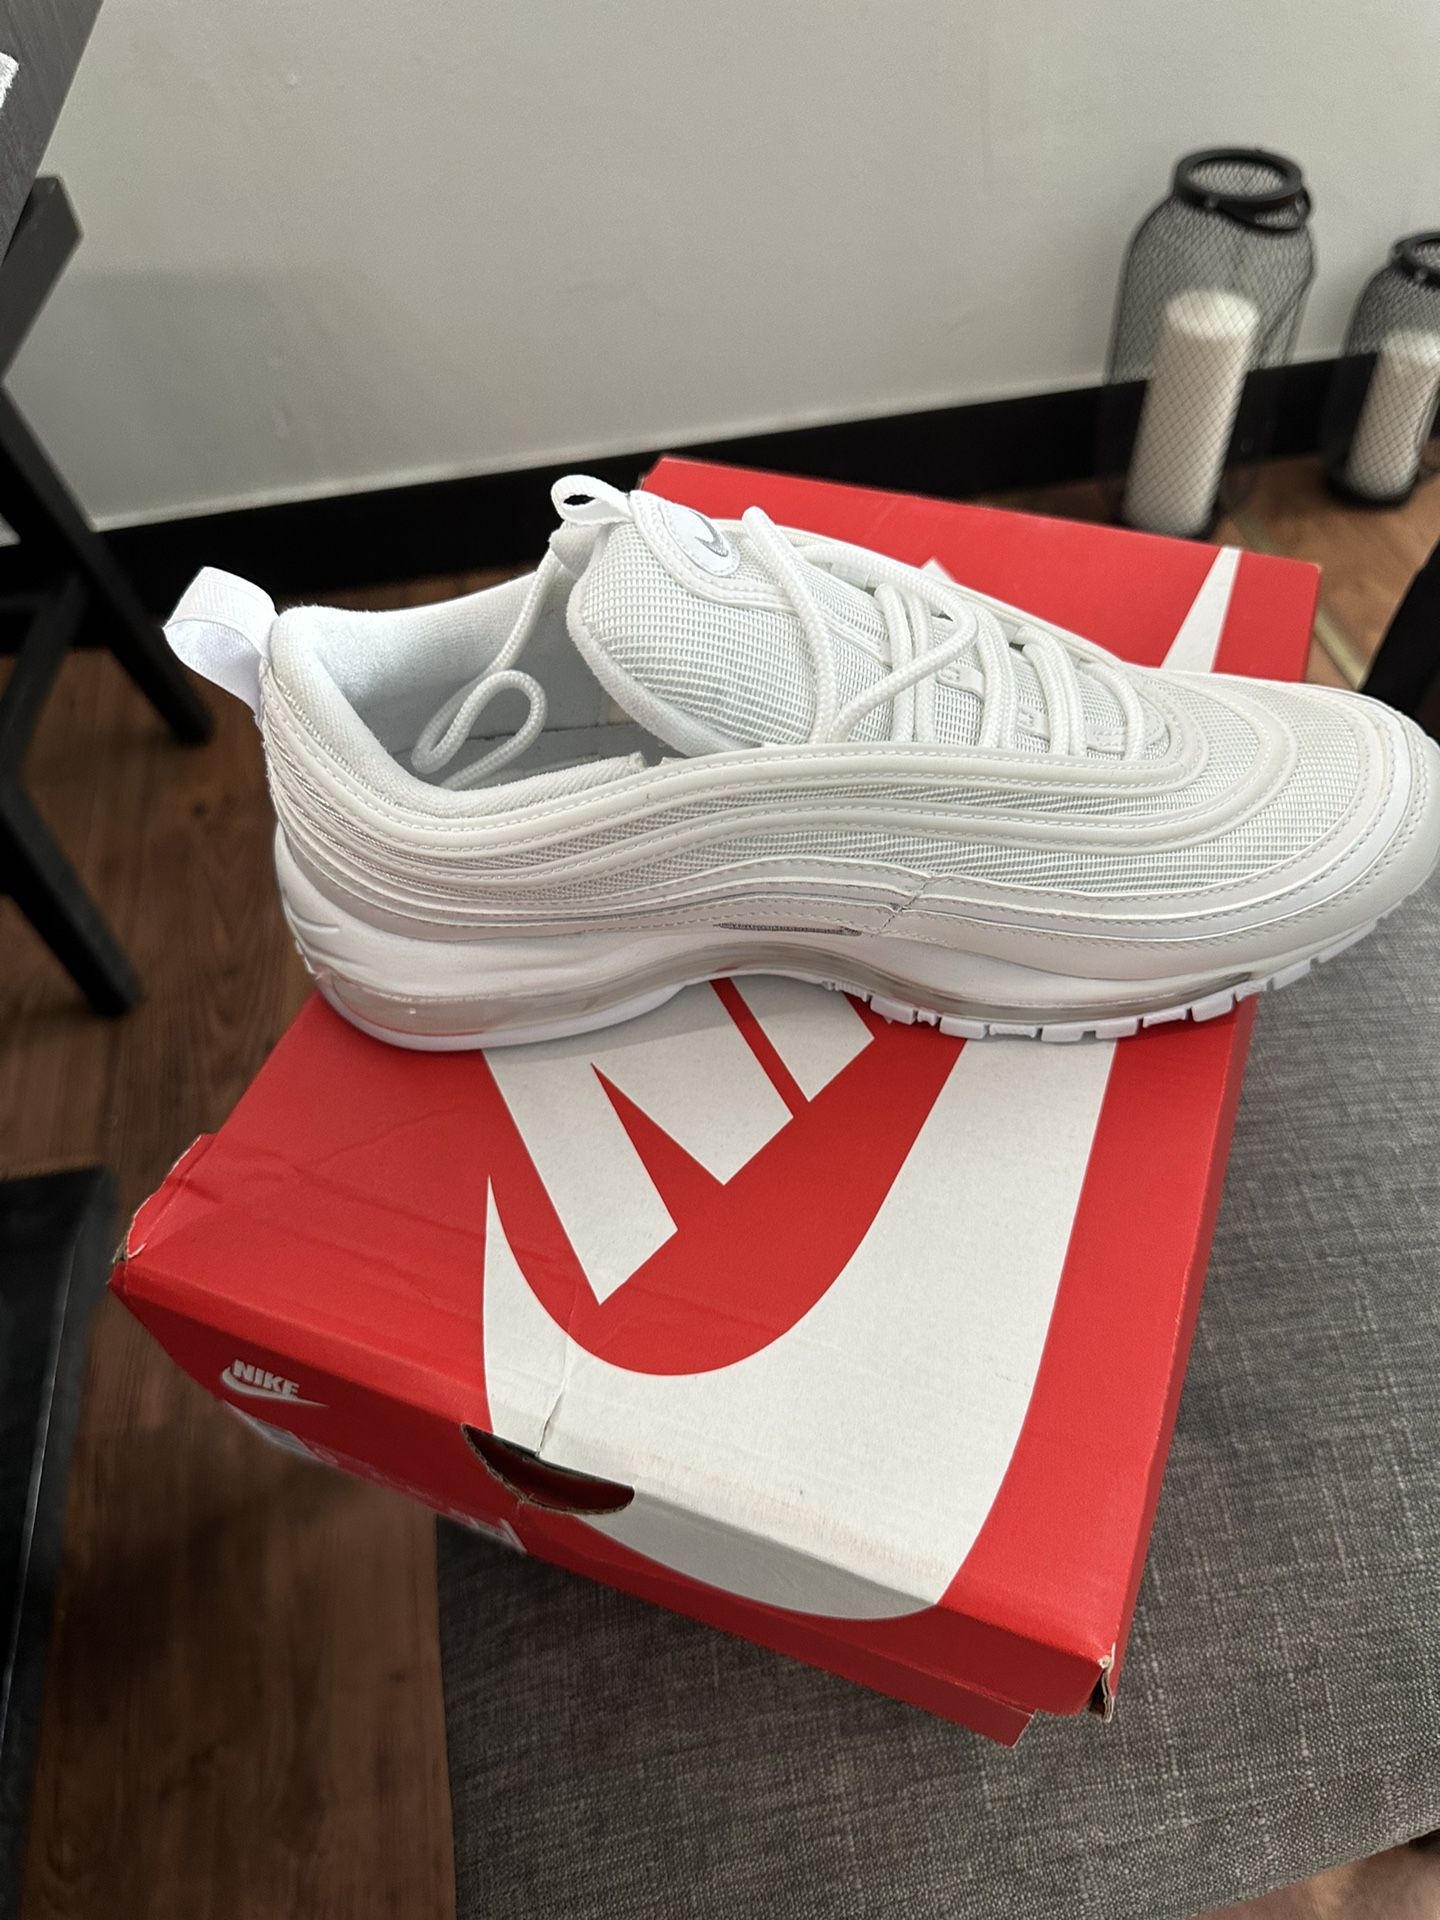 Nike Air Max 97 for in Ana, CA - OfferUp